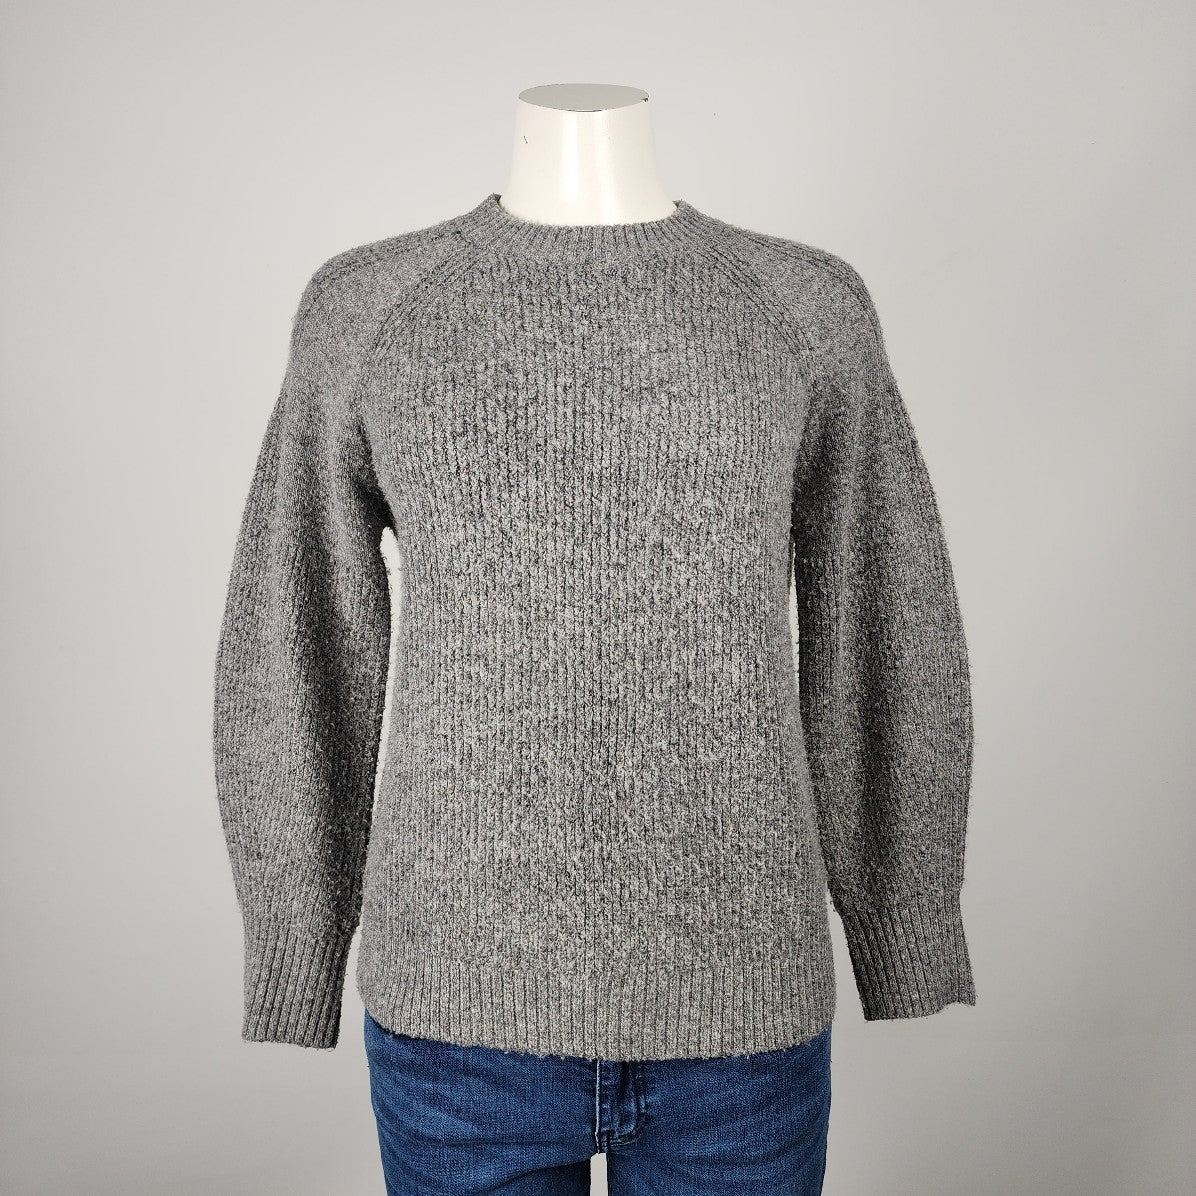 Top Shop Grey Wool Knit Sweater Size S